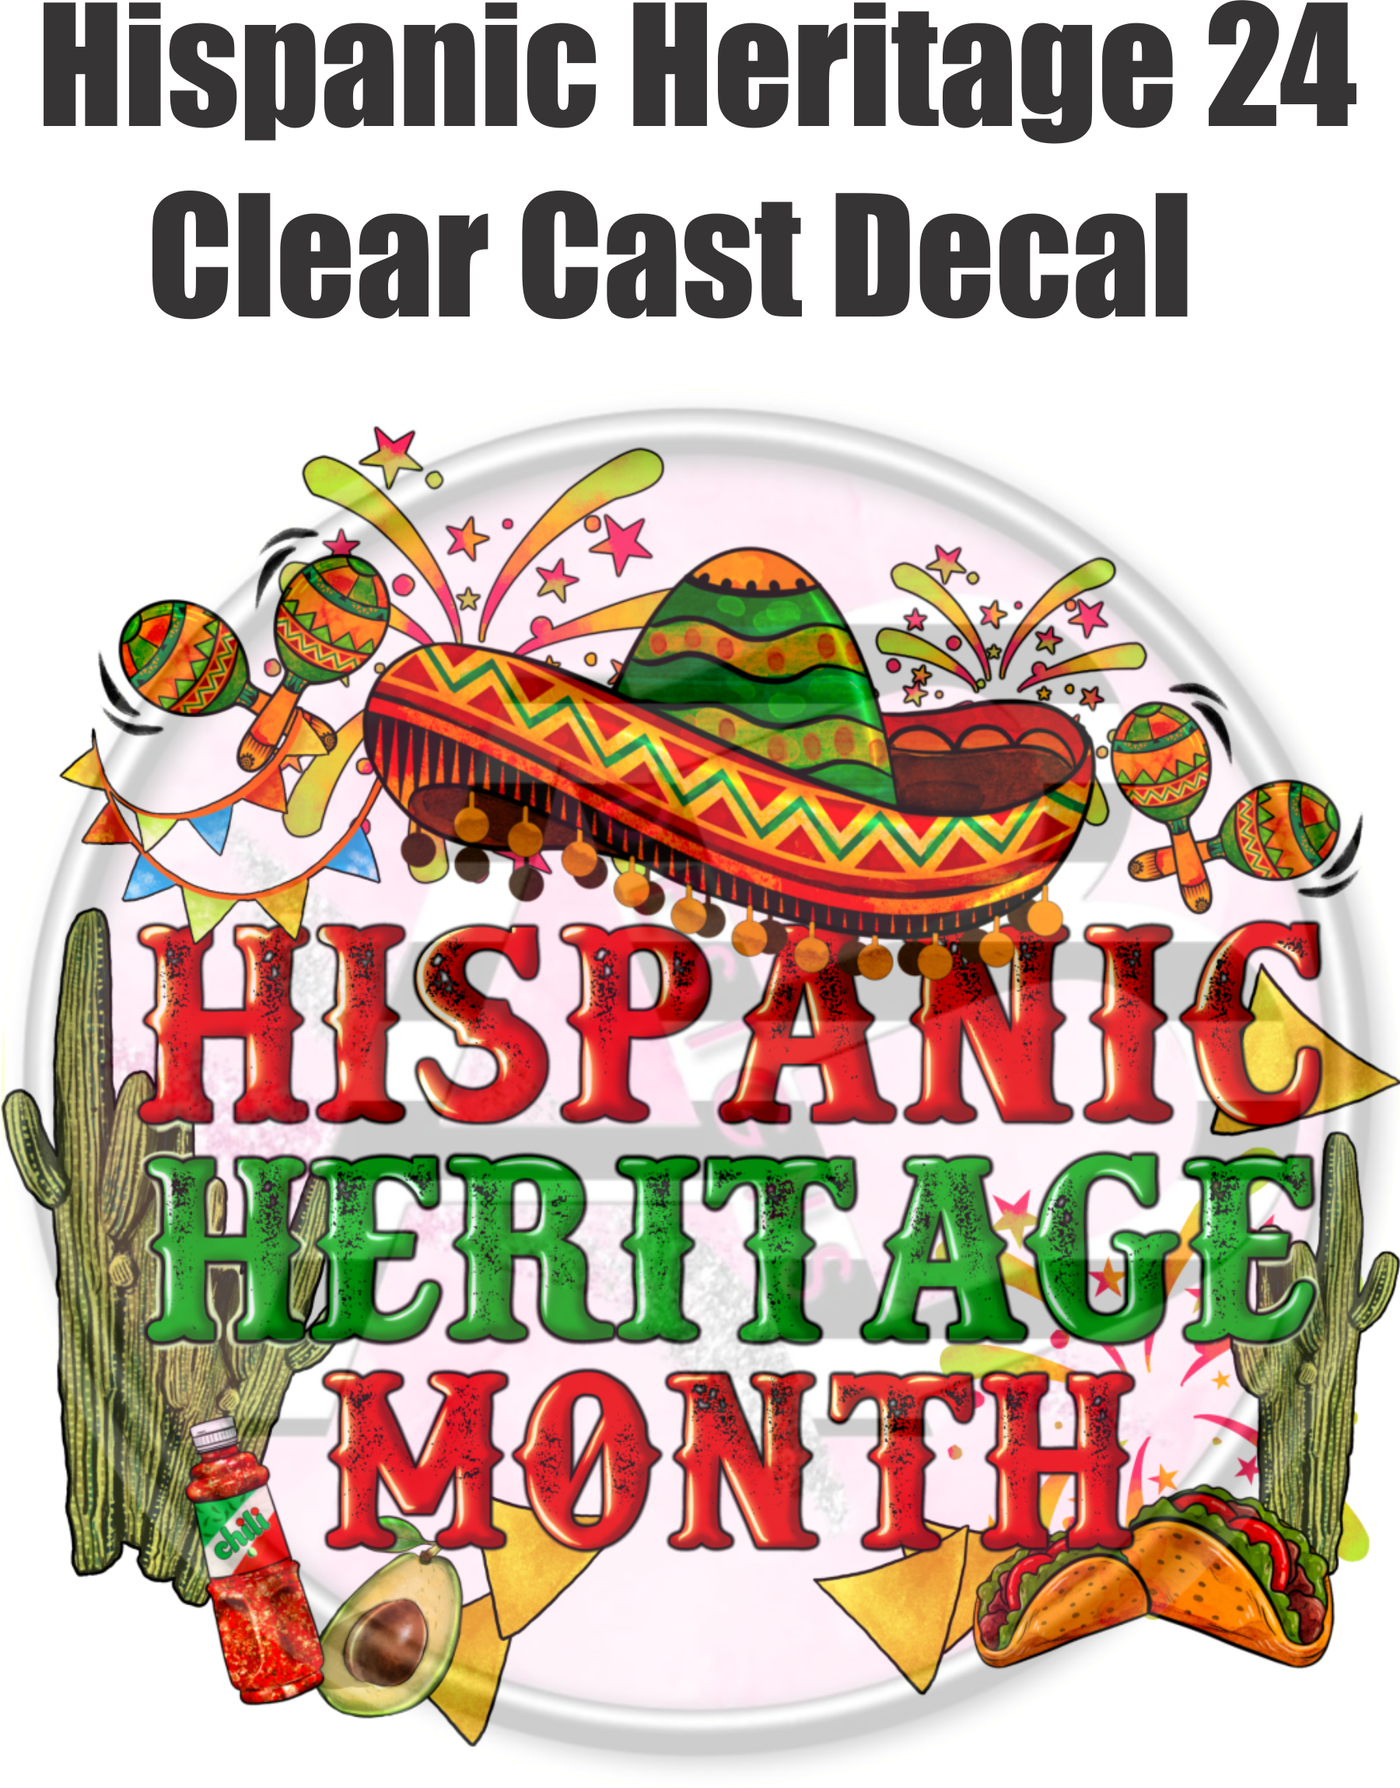 Hispanic Heritage 24 - Clear Cast Decal